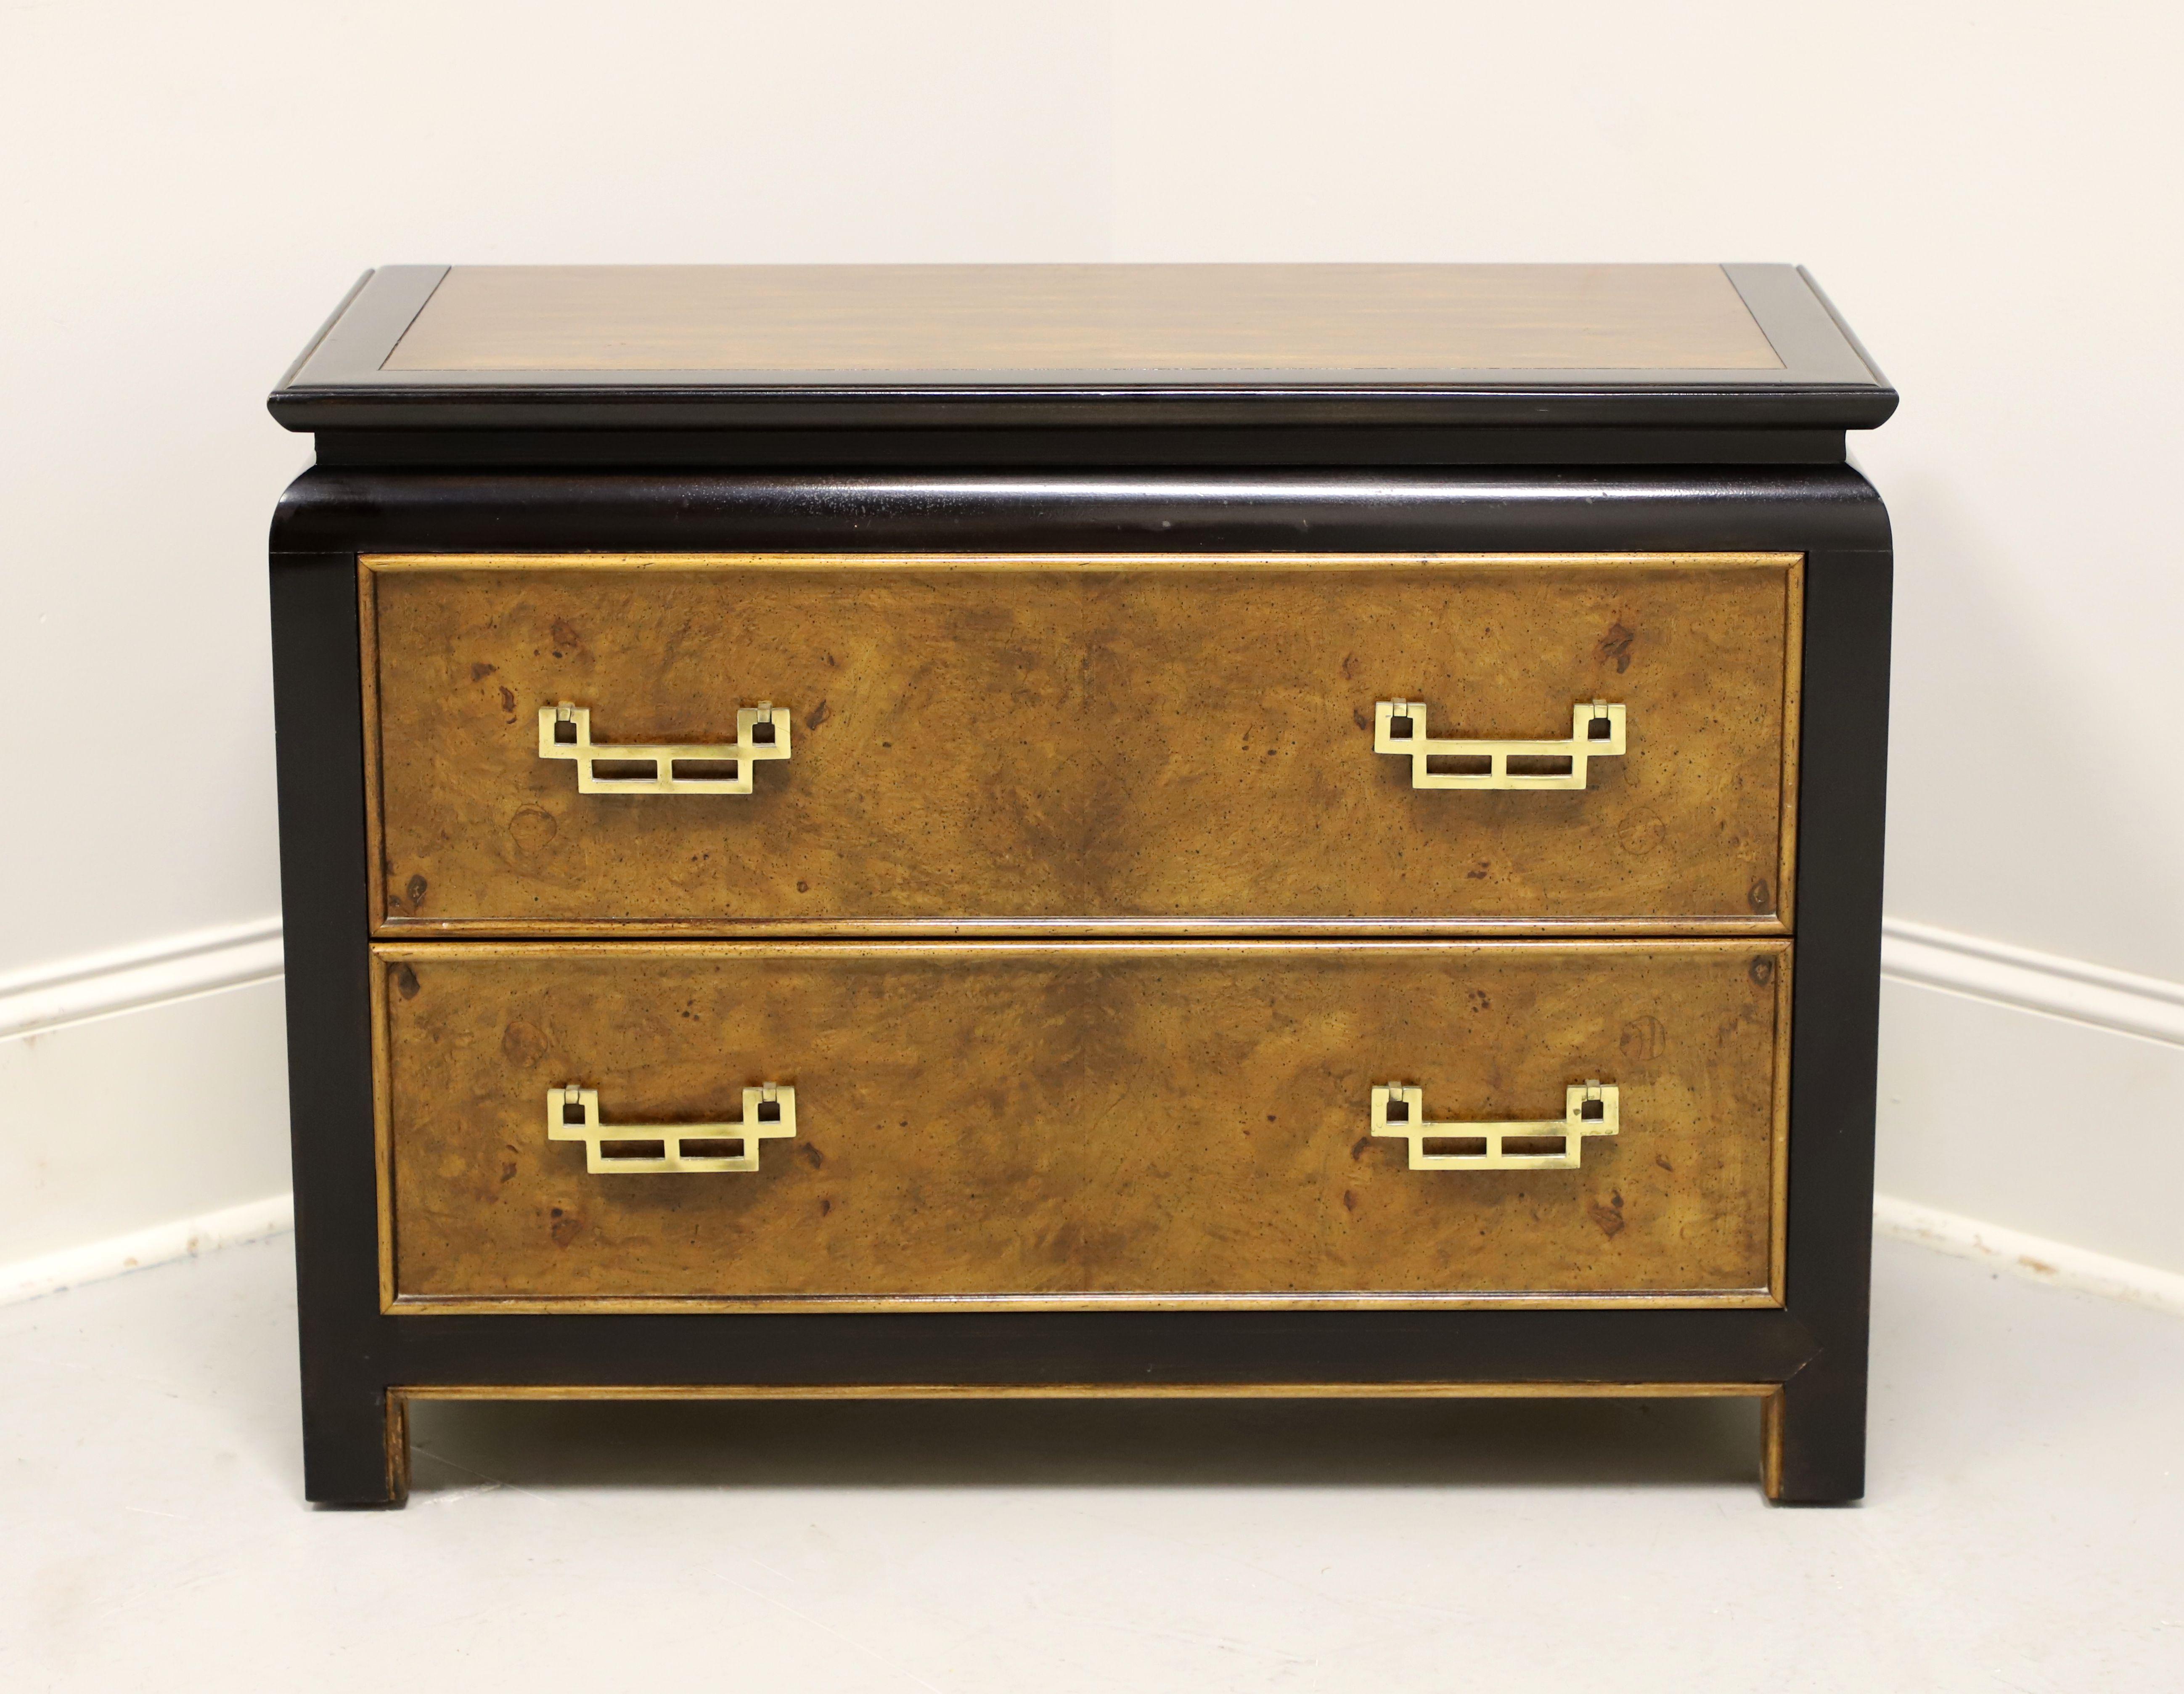 An Asian style bedside chest by high-quality furniture maker Century Furniture, from their 